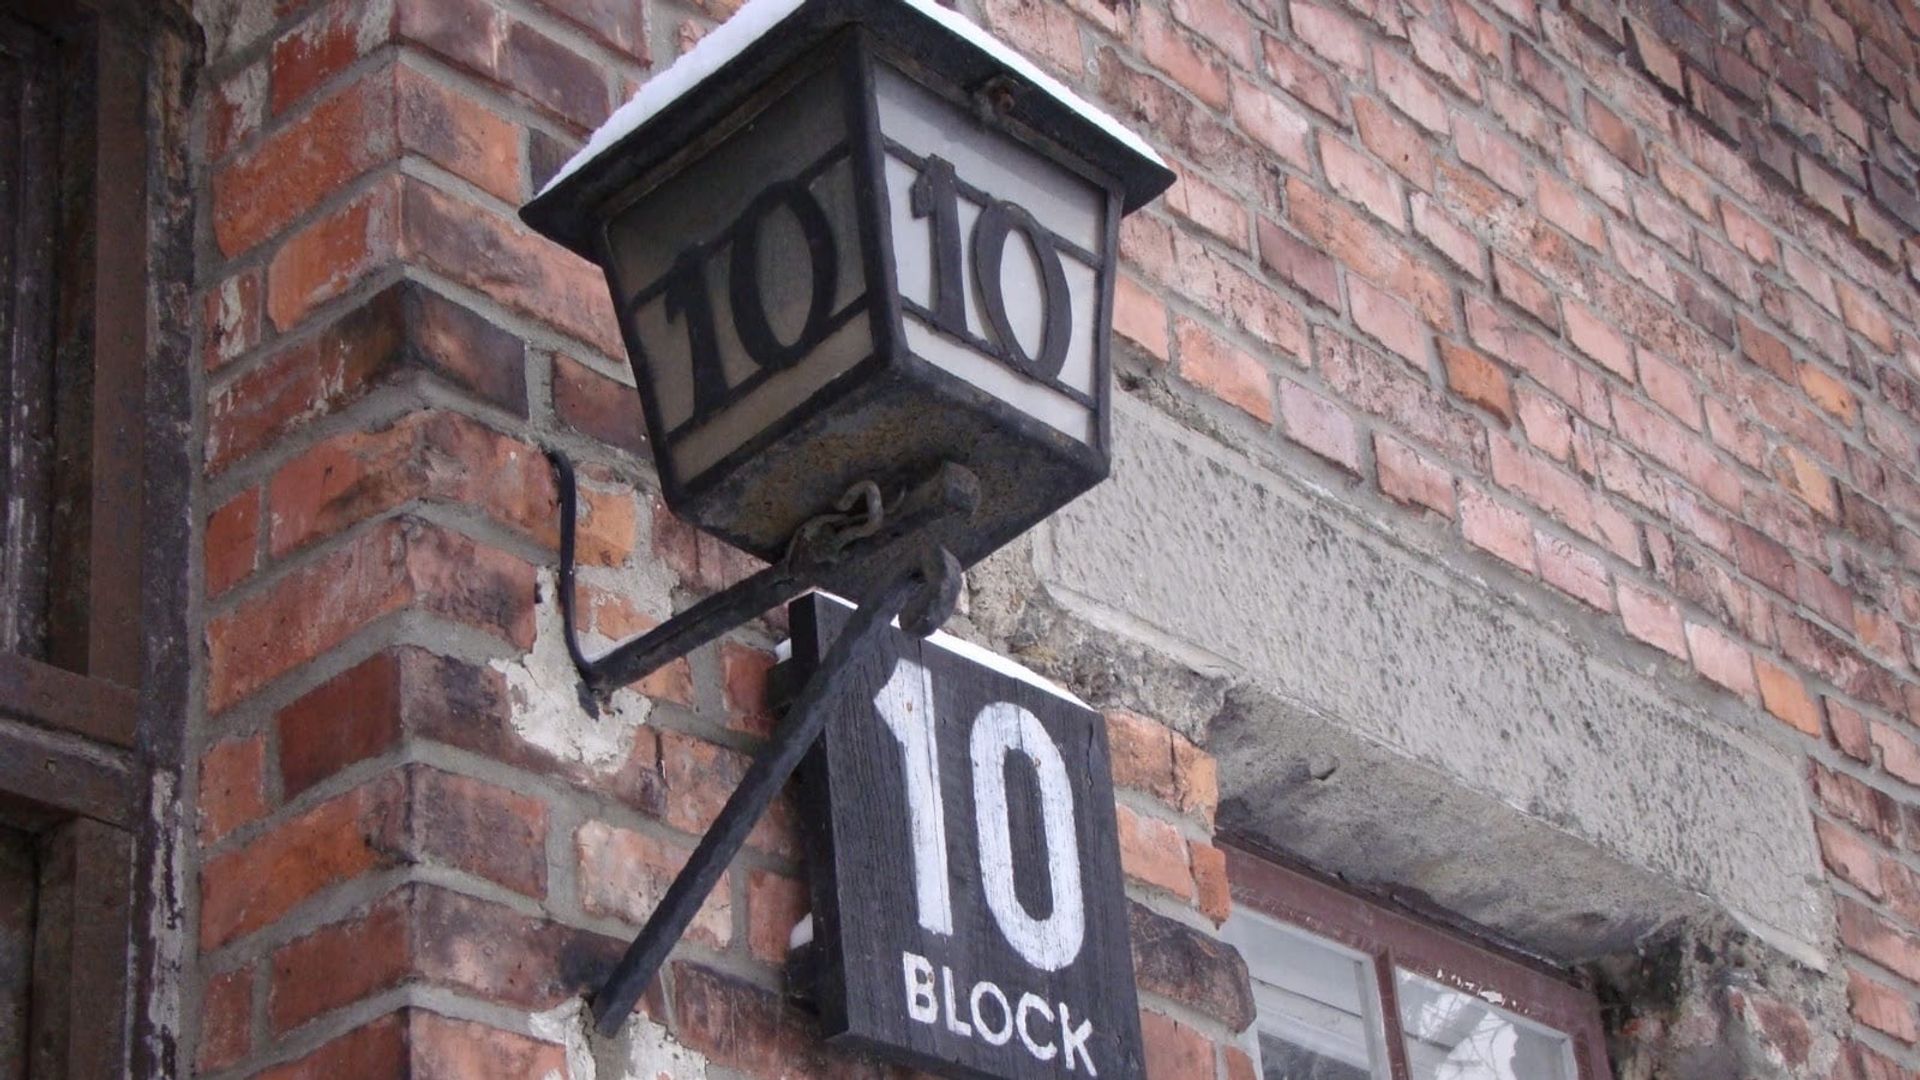 Made in Auschwitz: The Untold Story of Block 10 background